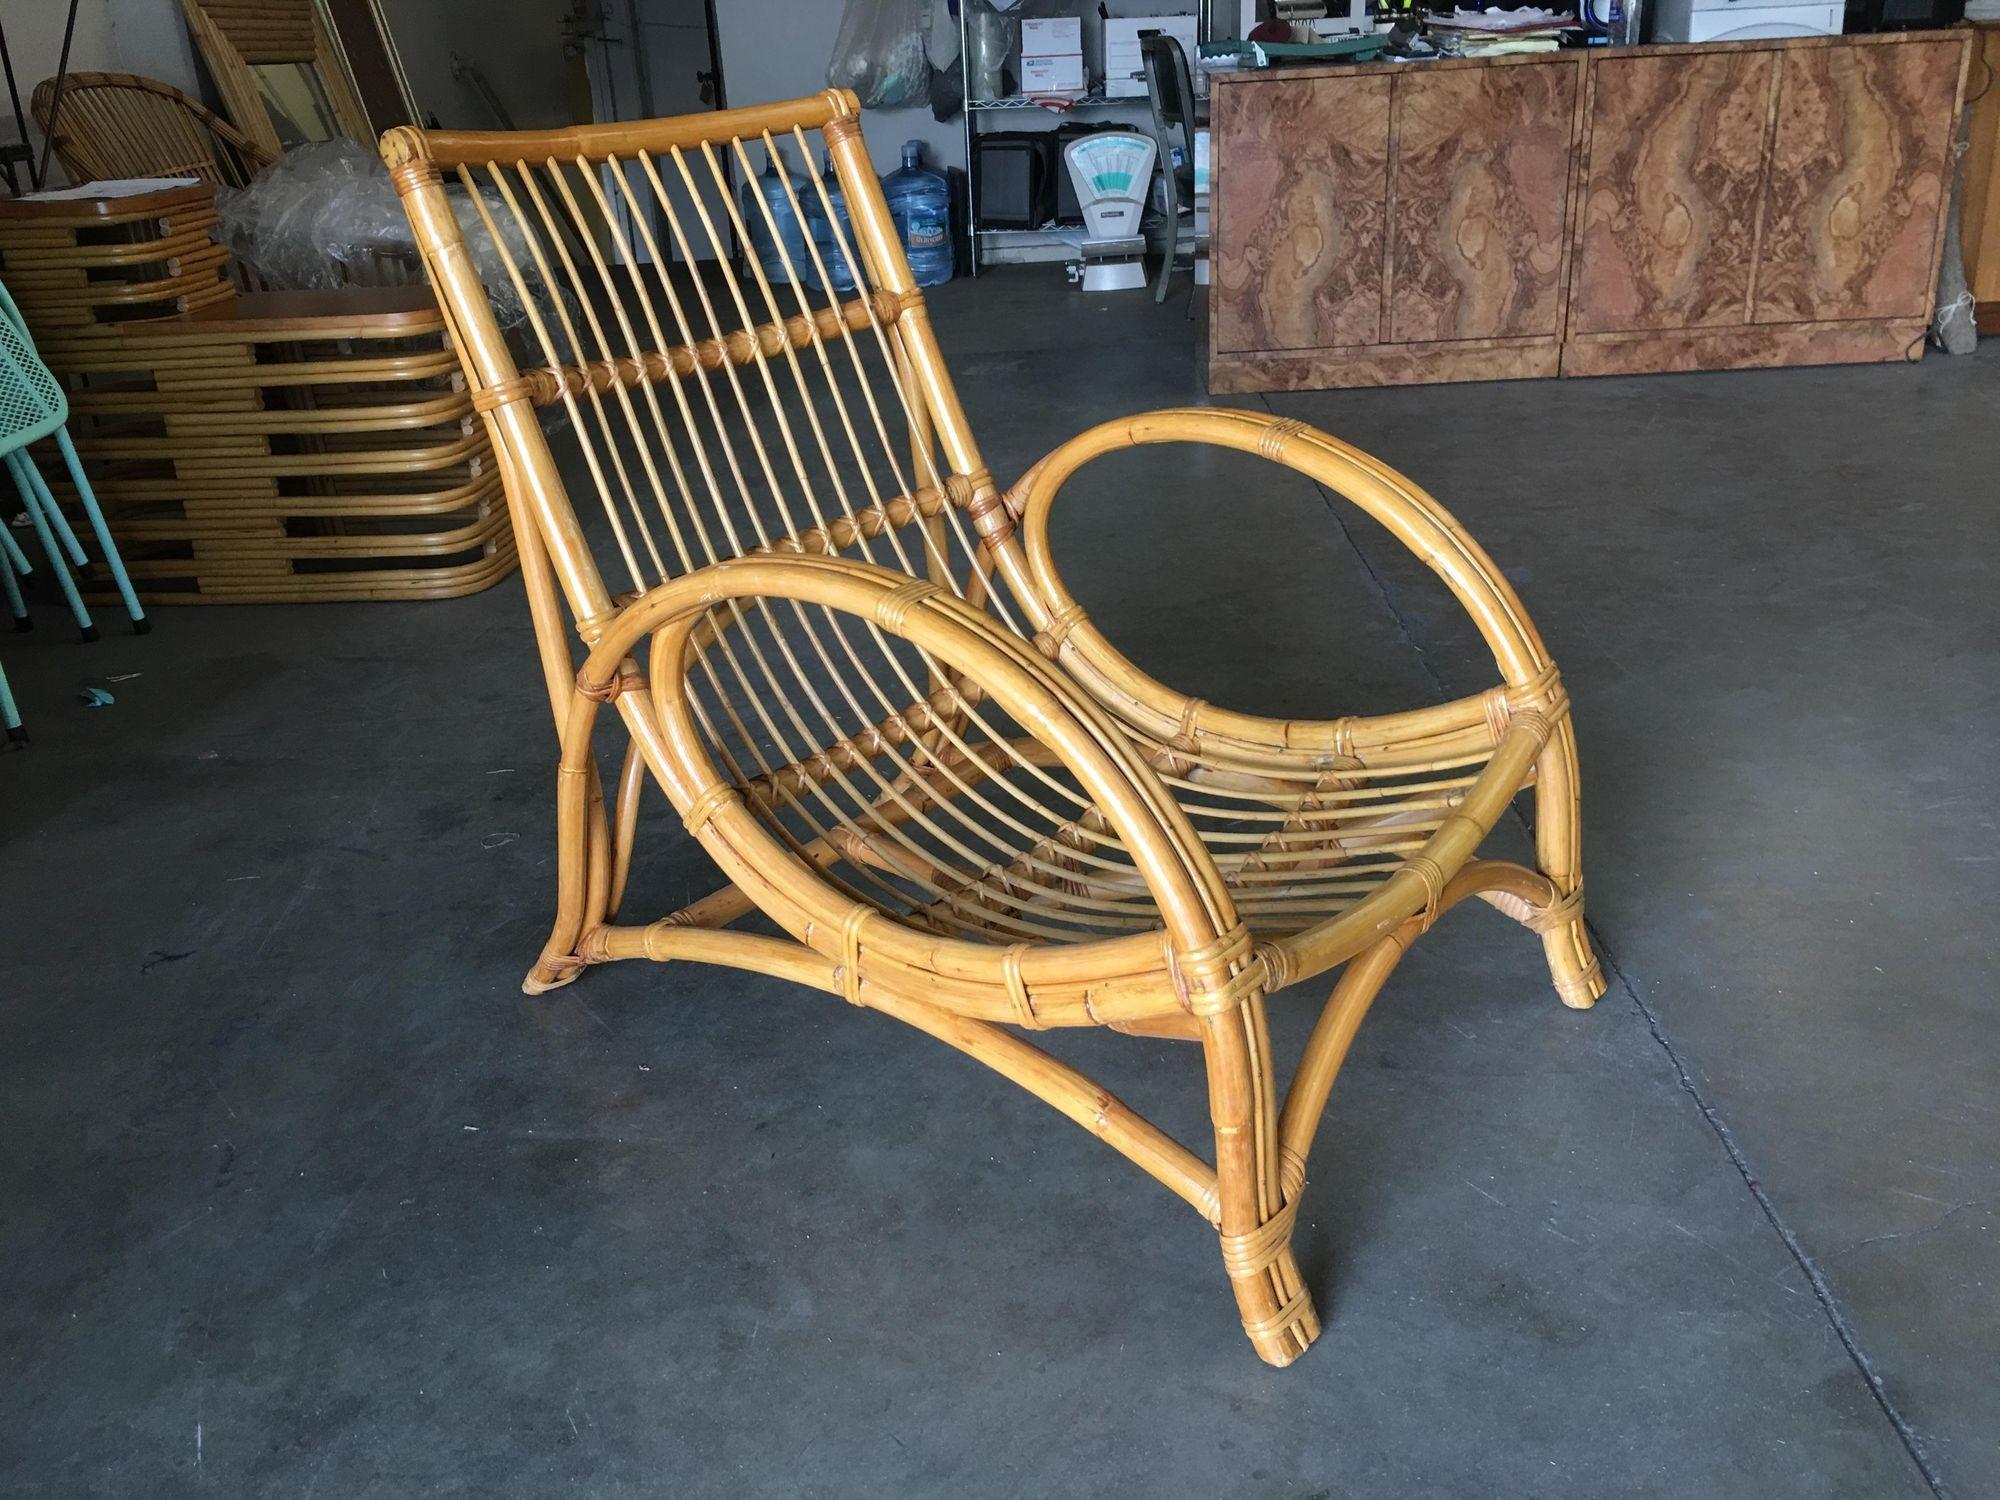 Restored Two-Strand Slope Seat Rattan Chaise Lounge With Ottoman In Excellent Condition For Sale In Van Nuys, CA